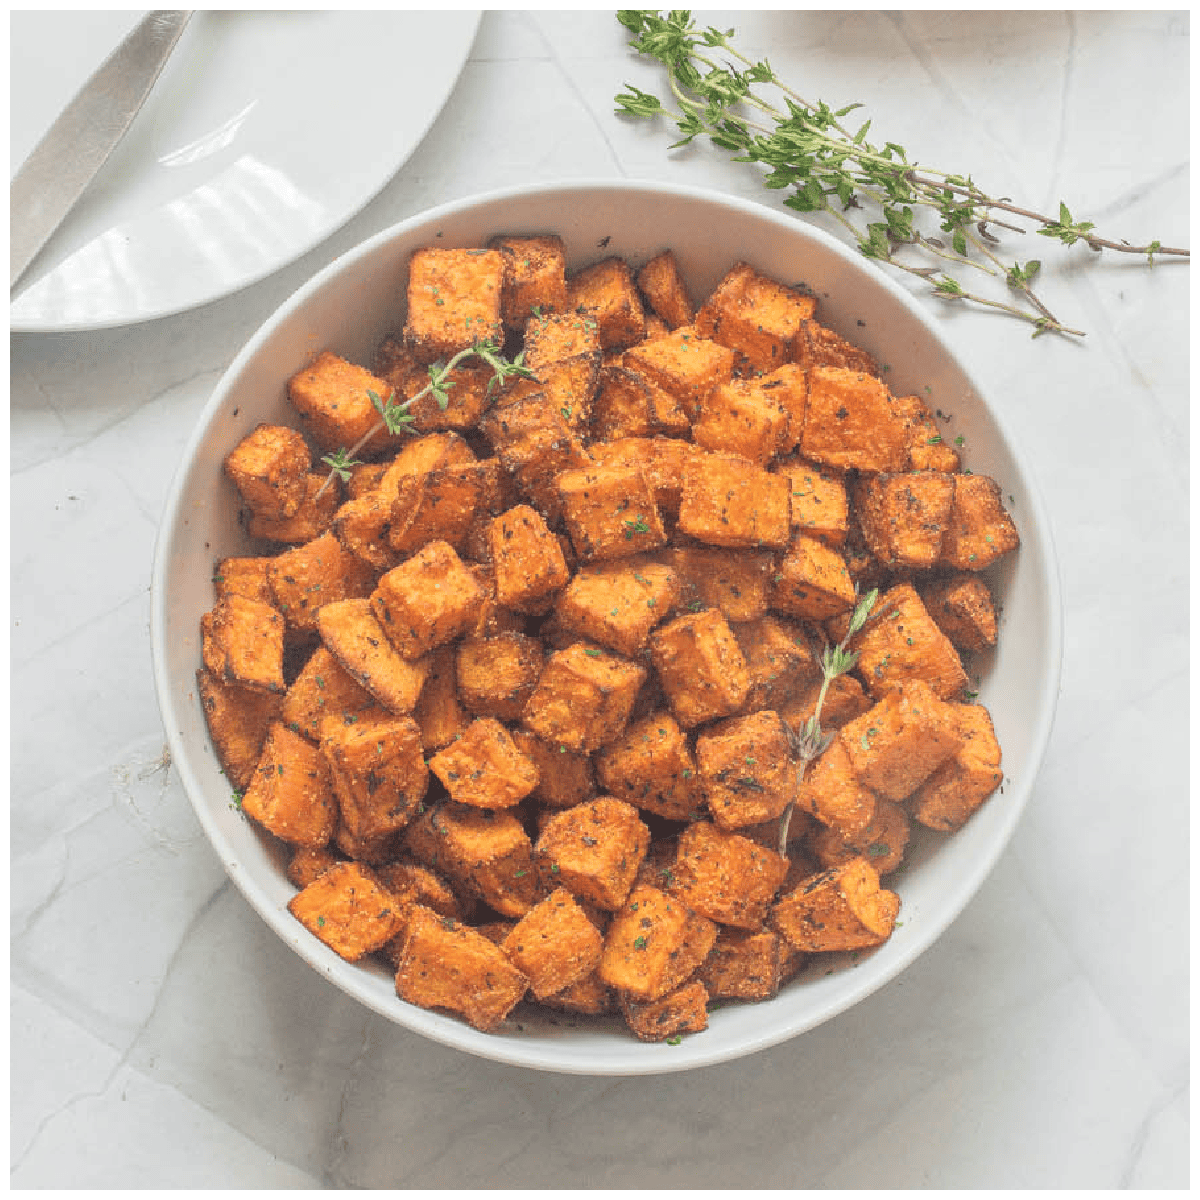 A bowl of sweet potato cubes with garnish